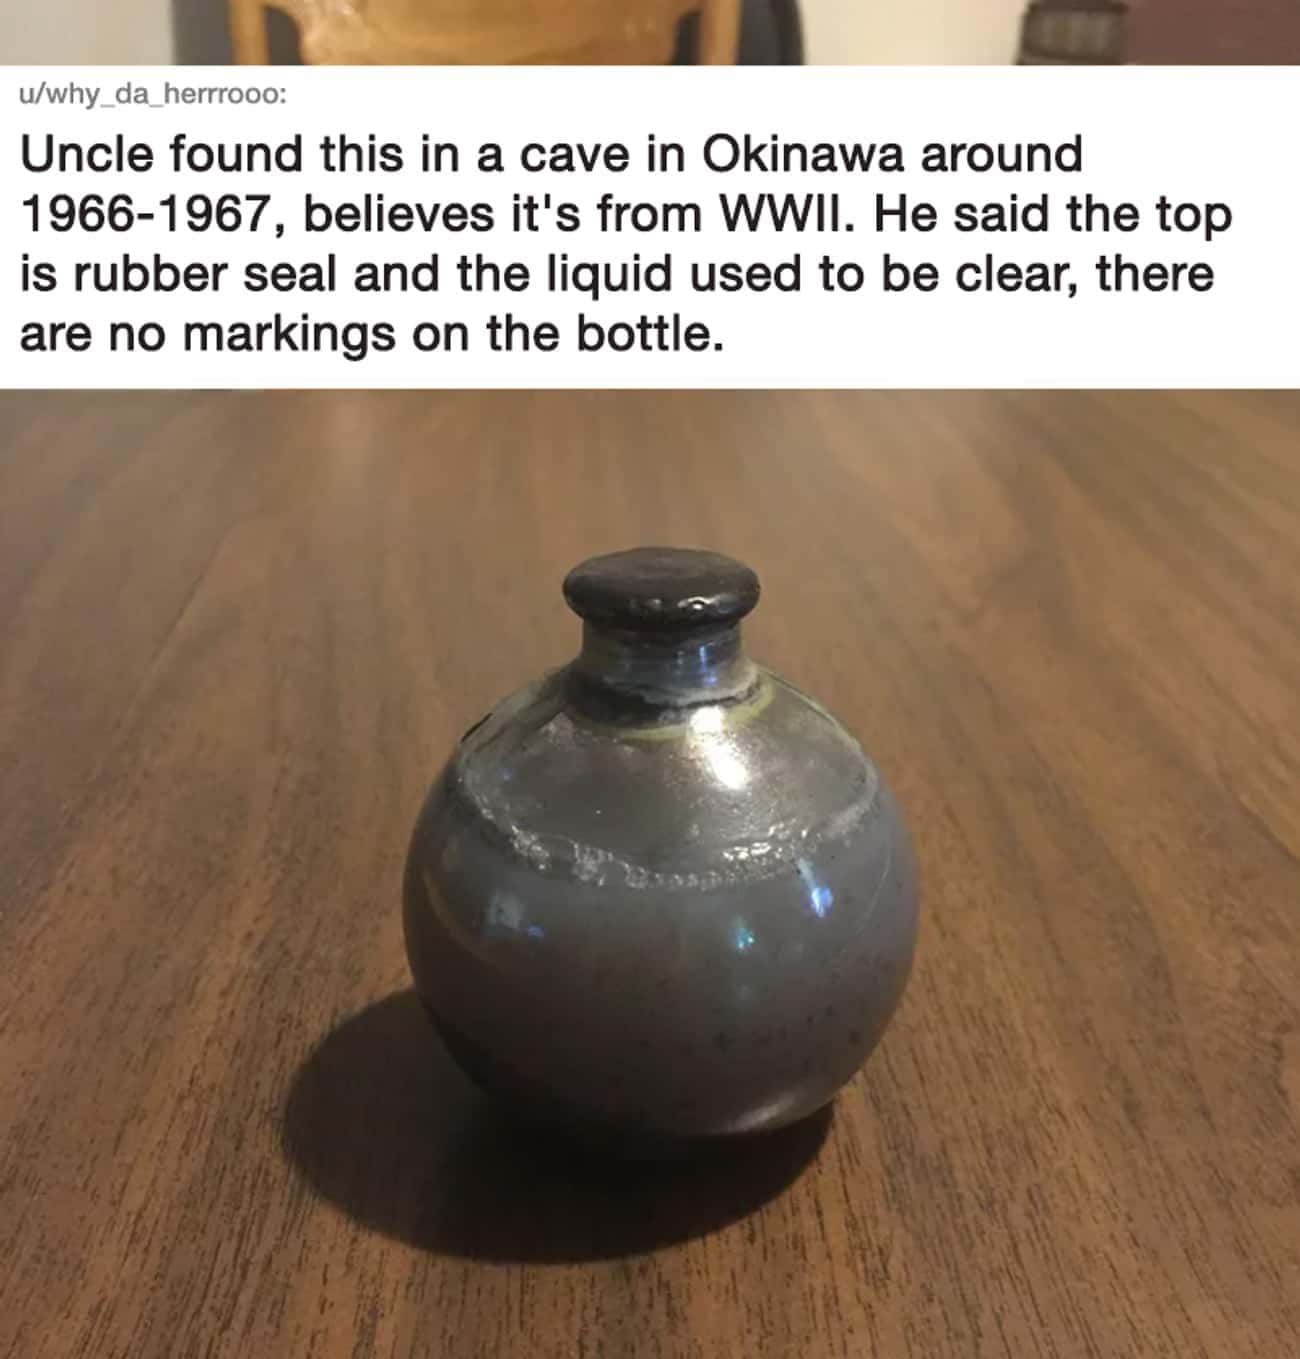 'Uncle Found This In A Cave In Okinawa Around 1966-1967.' What Is This Bottle?